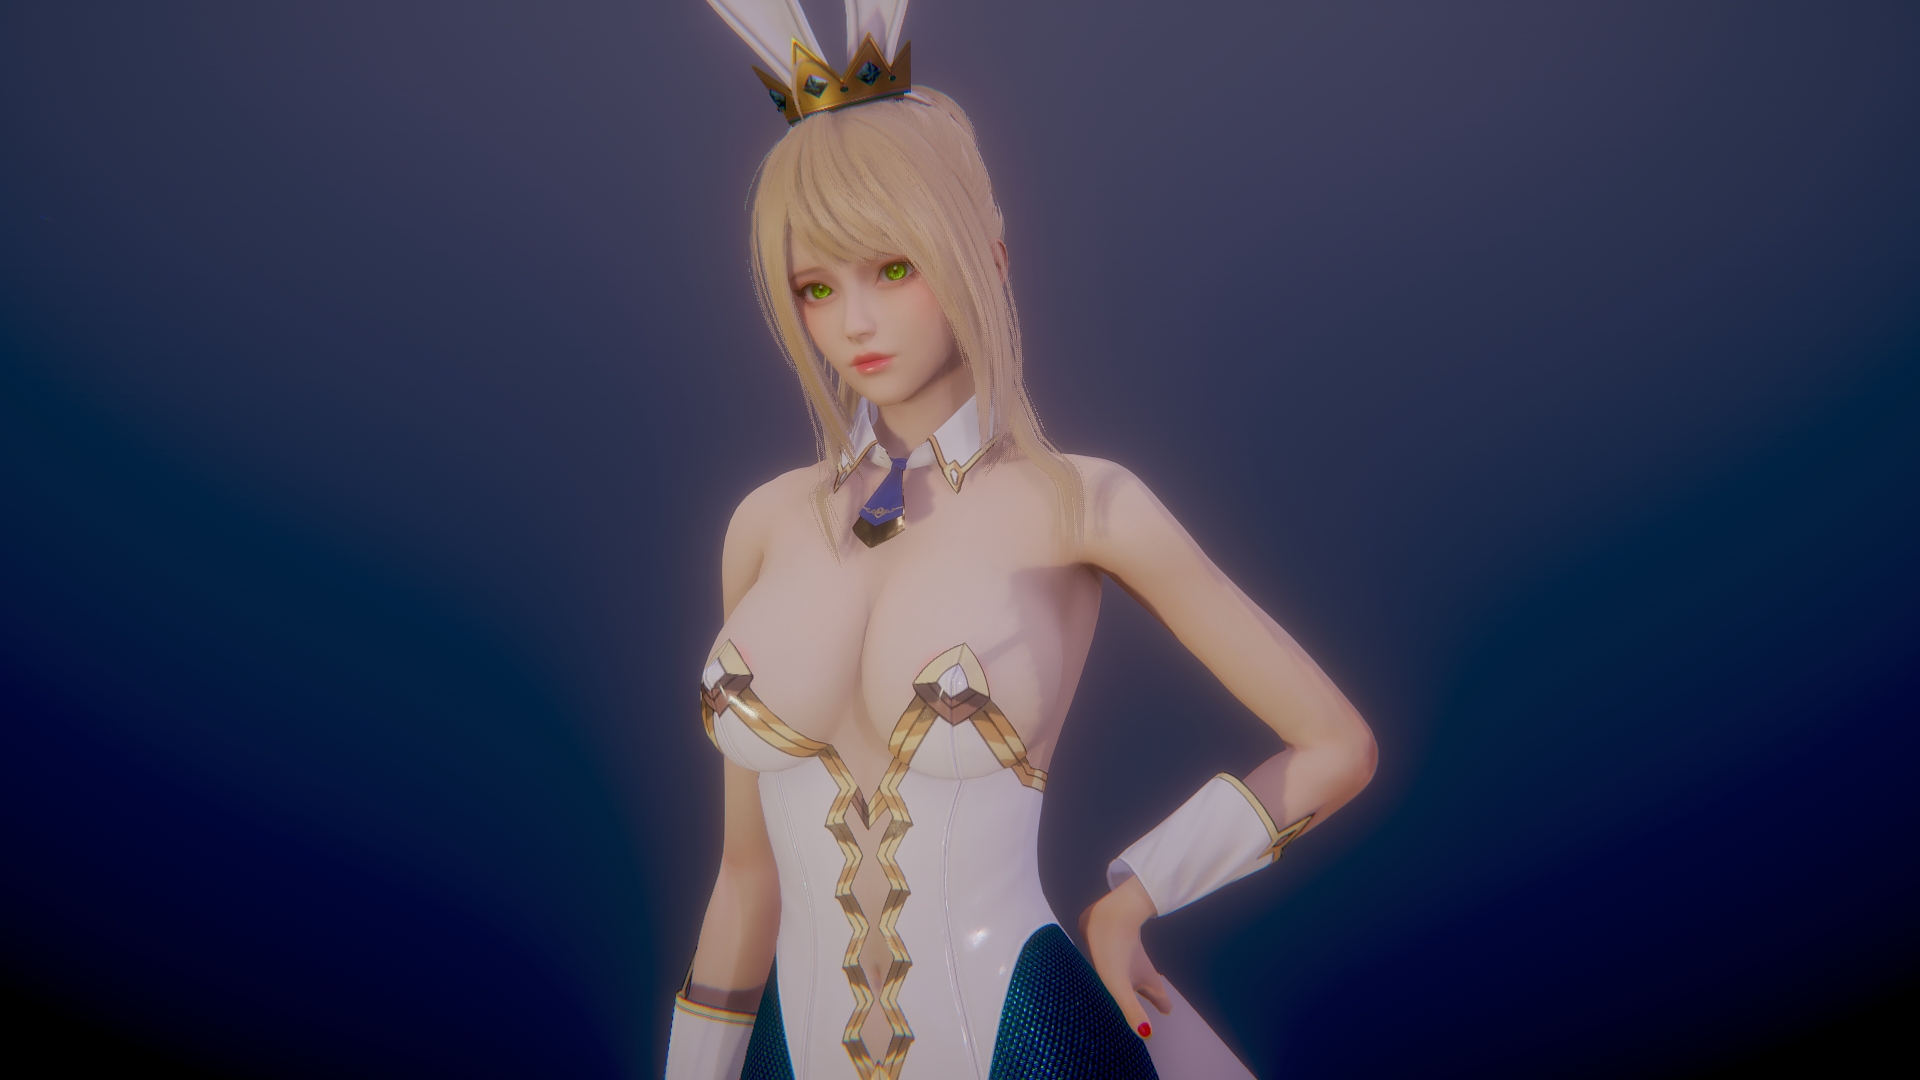 Honey Select 2 Honey Select 2 3d Girl Bunny Sexy Aigirl Big Tits Big Breasts Outfit Long Legs Animal Ears Sfw 5